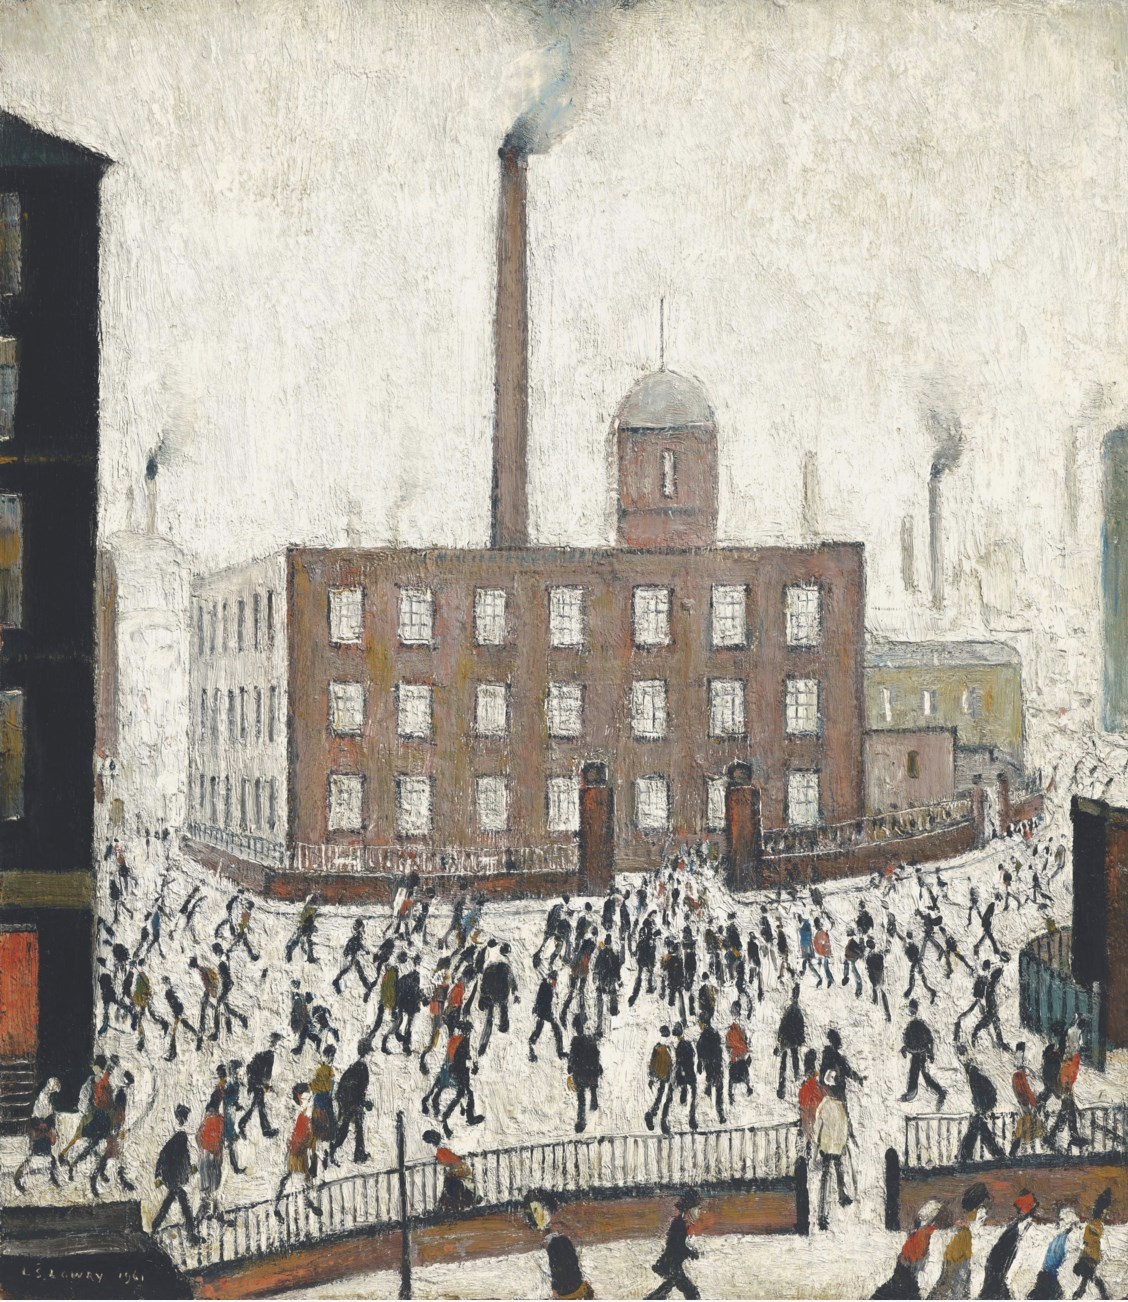 The Mill, Early Morning (1961) by Laurence Stephen Lowry (1887 - 1976), English artist.